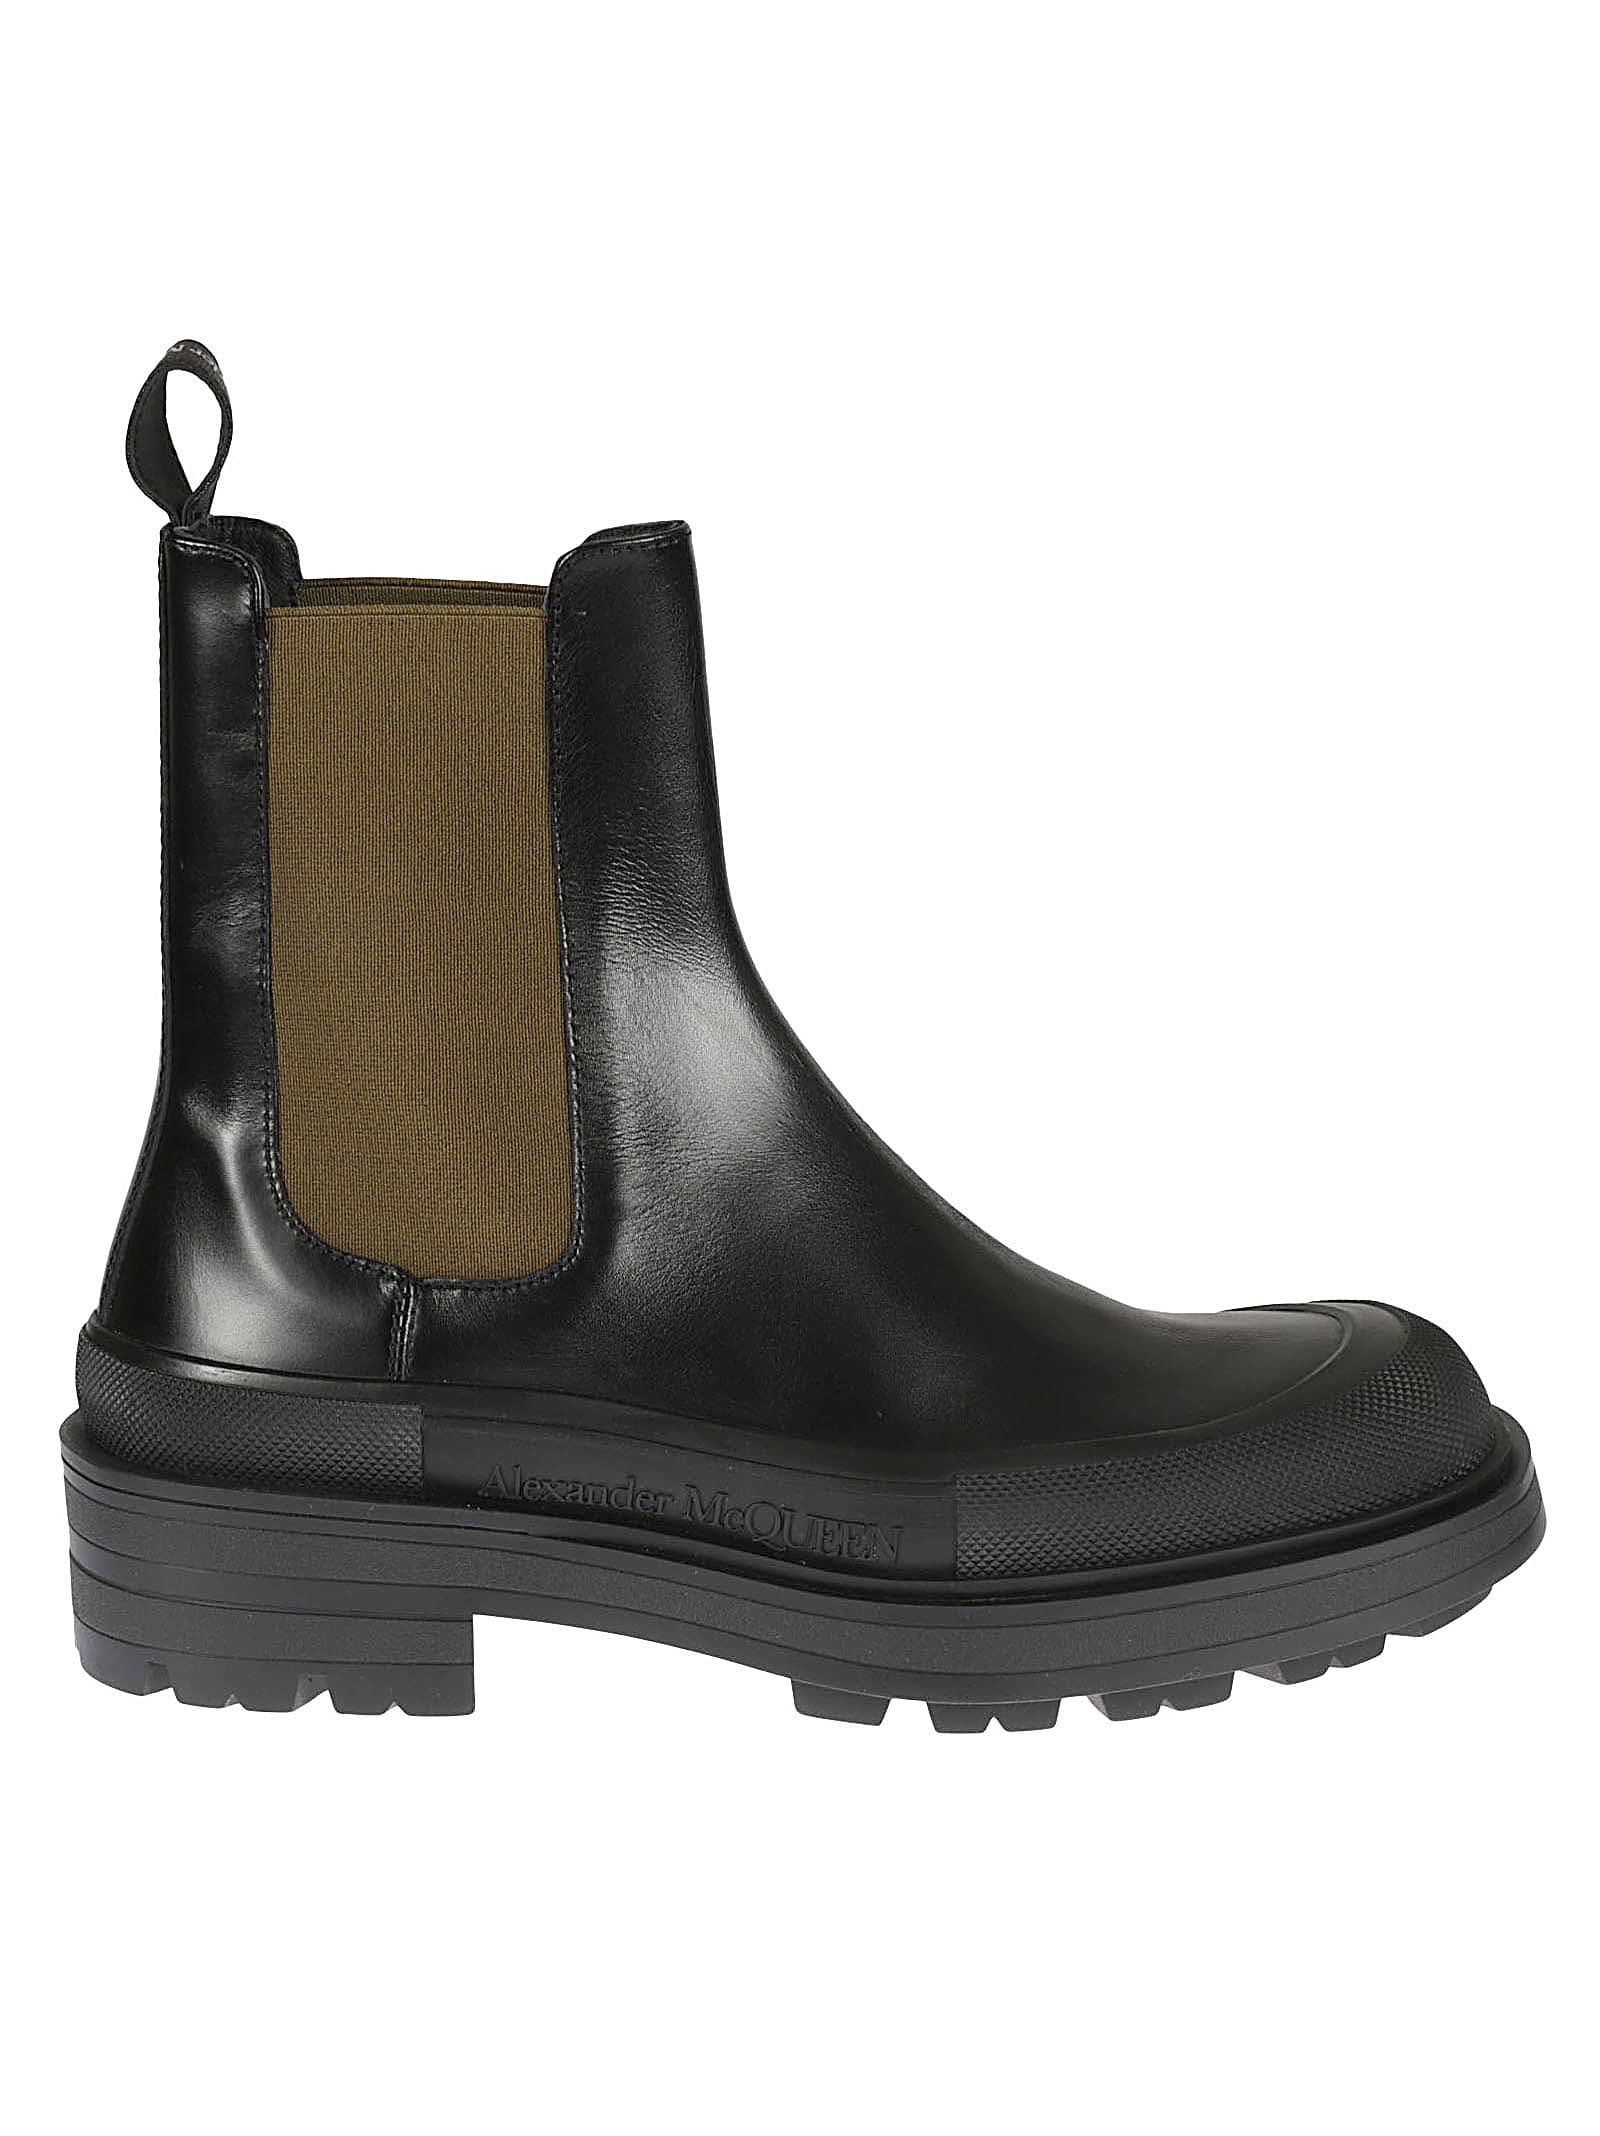 Alexander Mcqueen Black Leather Boxcar Ankle Boots In Black/silver